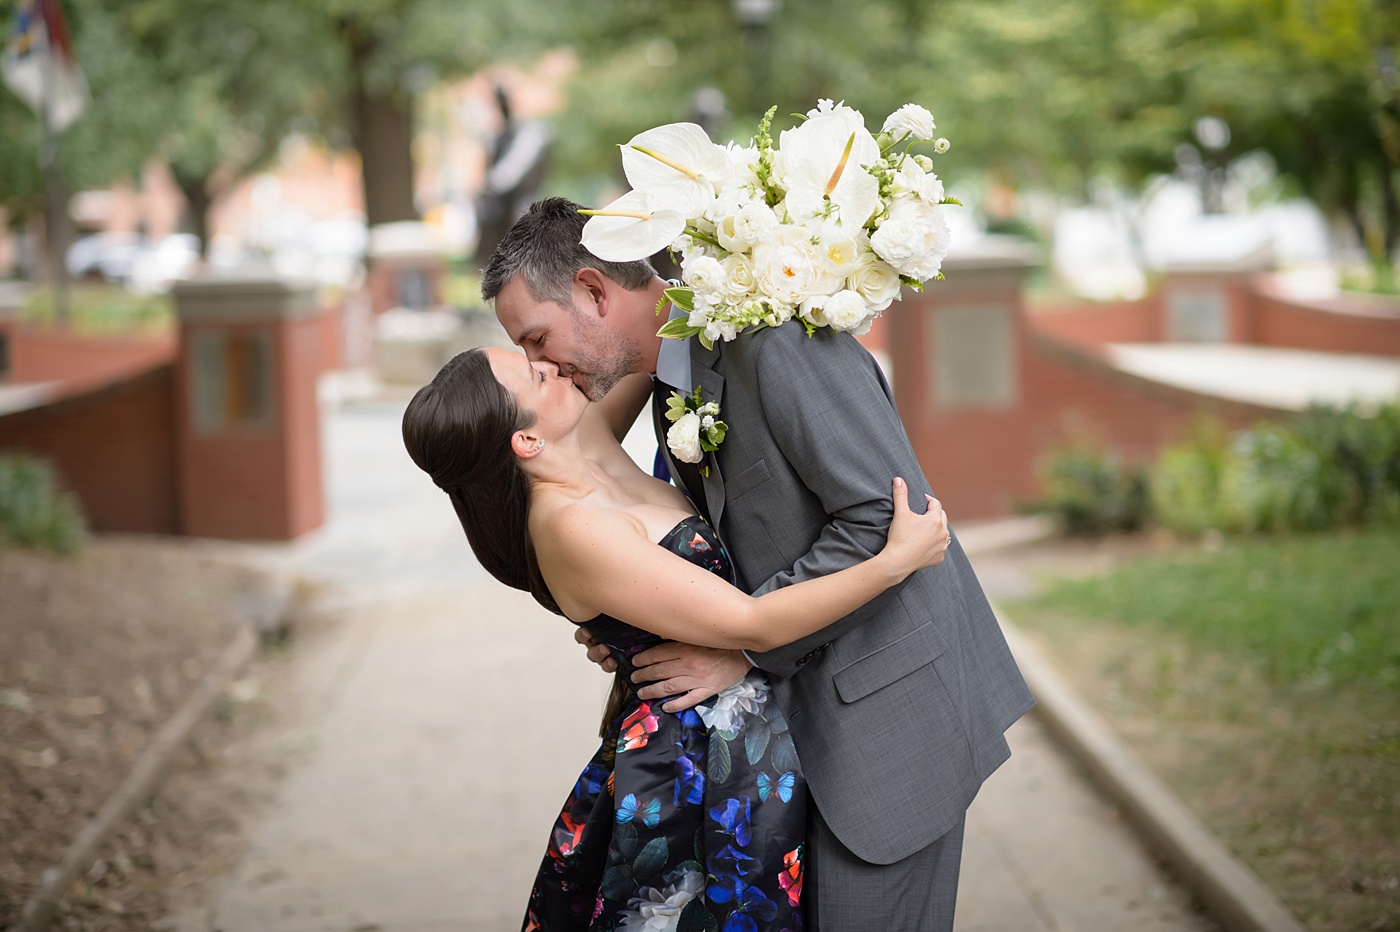 Mikkel Paige Photography's wedding photos - an elopement in downtown Raleigh, North Carolina - with a white bouquet by @meristemfloral, beauty by Wink Hair and Makeup and photos by Brian Mullins Photography.